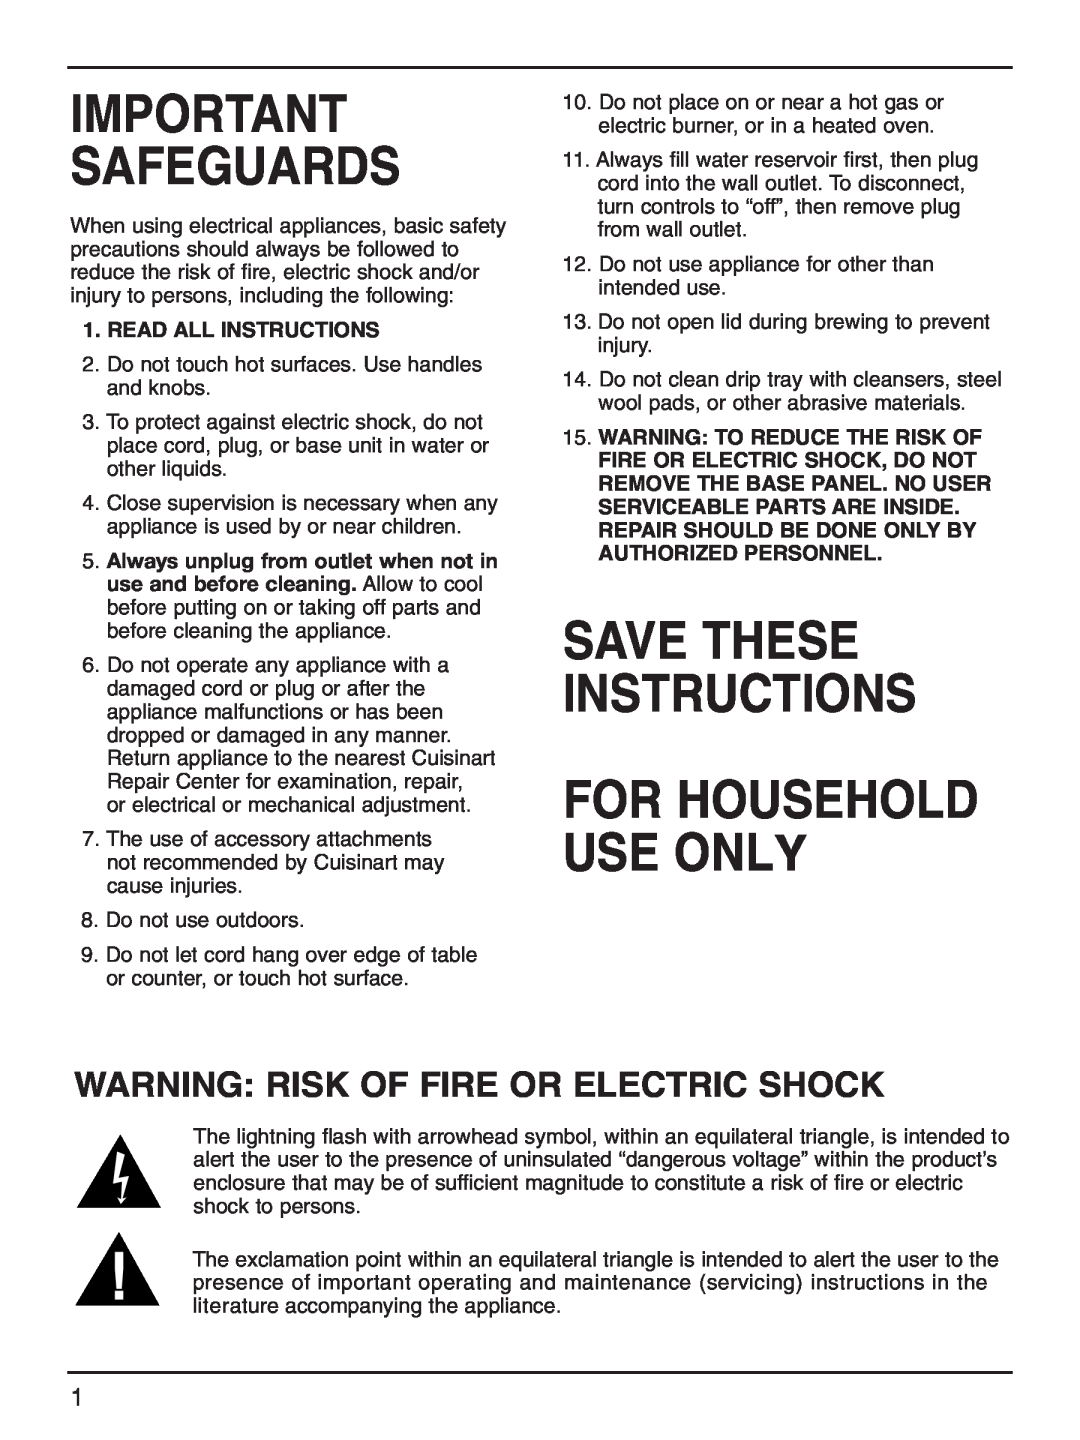 Cuisinart DCC-2000 manual Save These Instructions For Household Use Only, Warning Risk Of Fire Or Electric Shock 